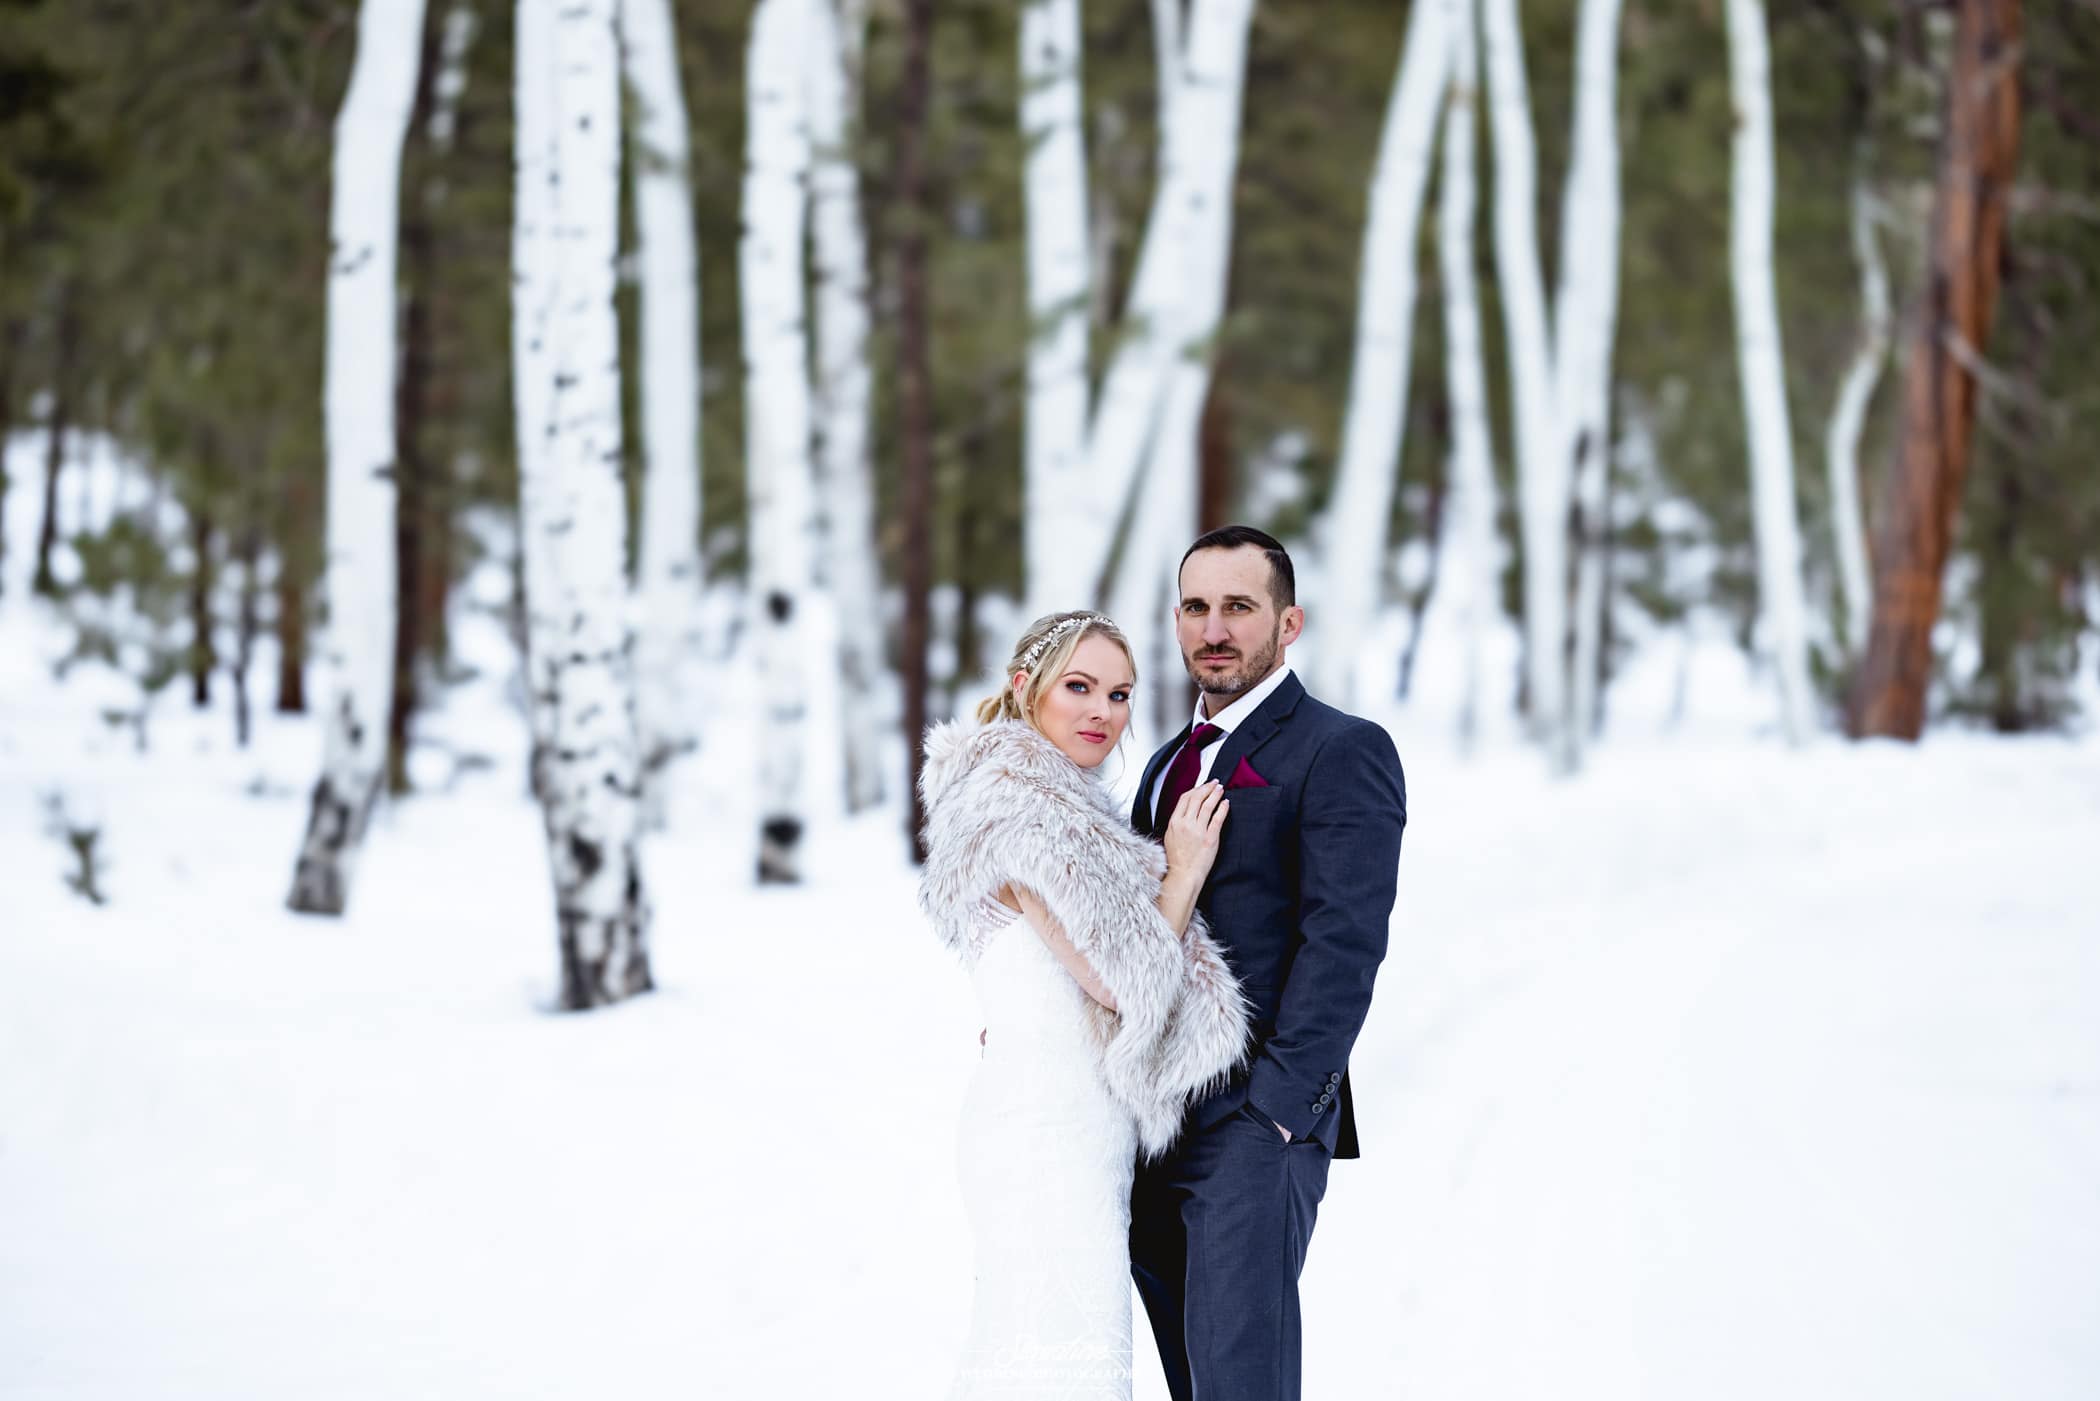 Bride and groom posing for camera in front of winter forest